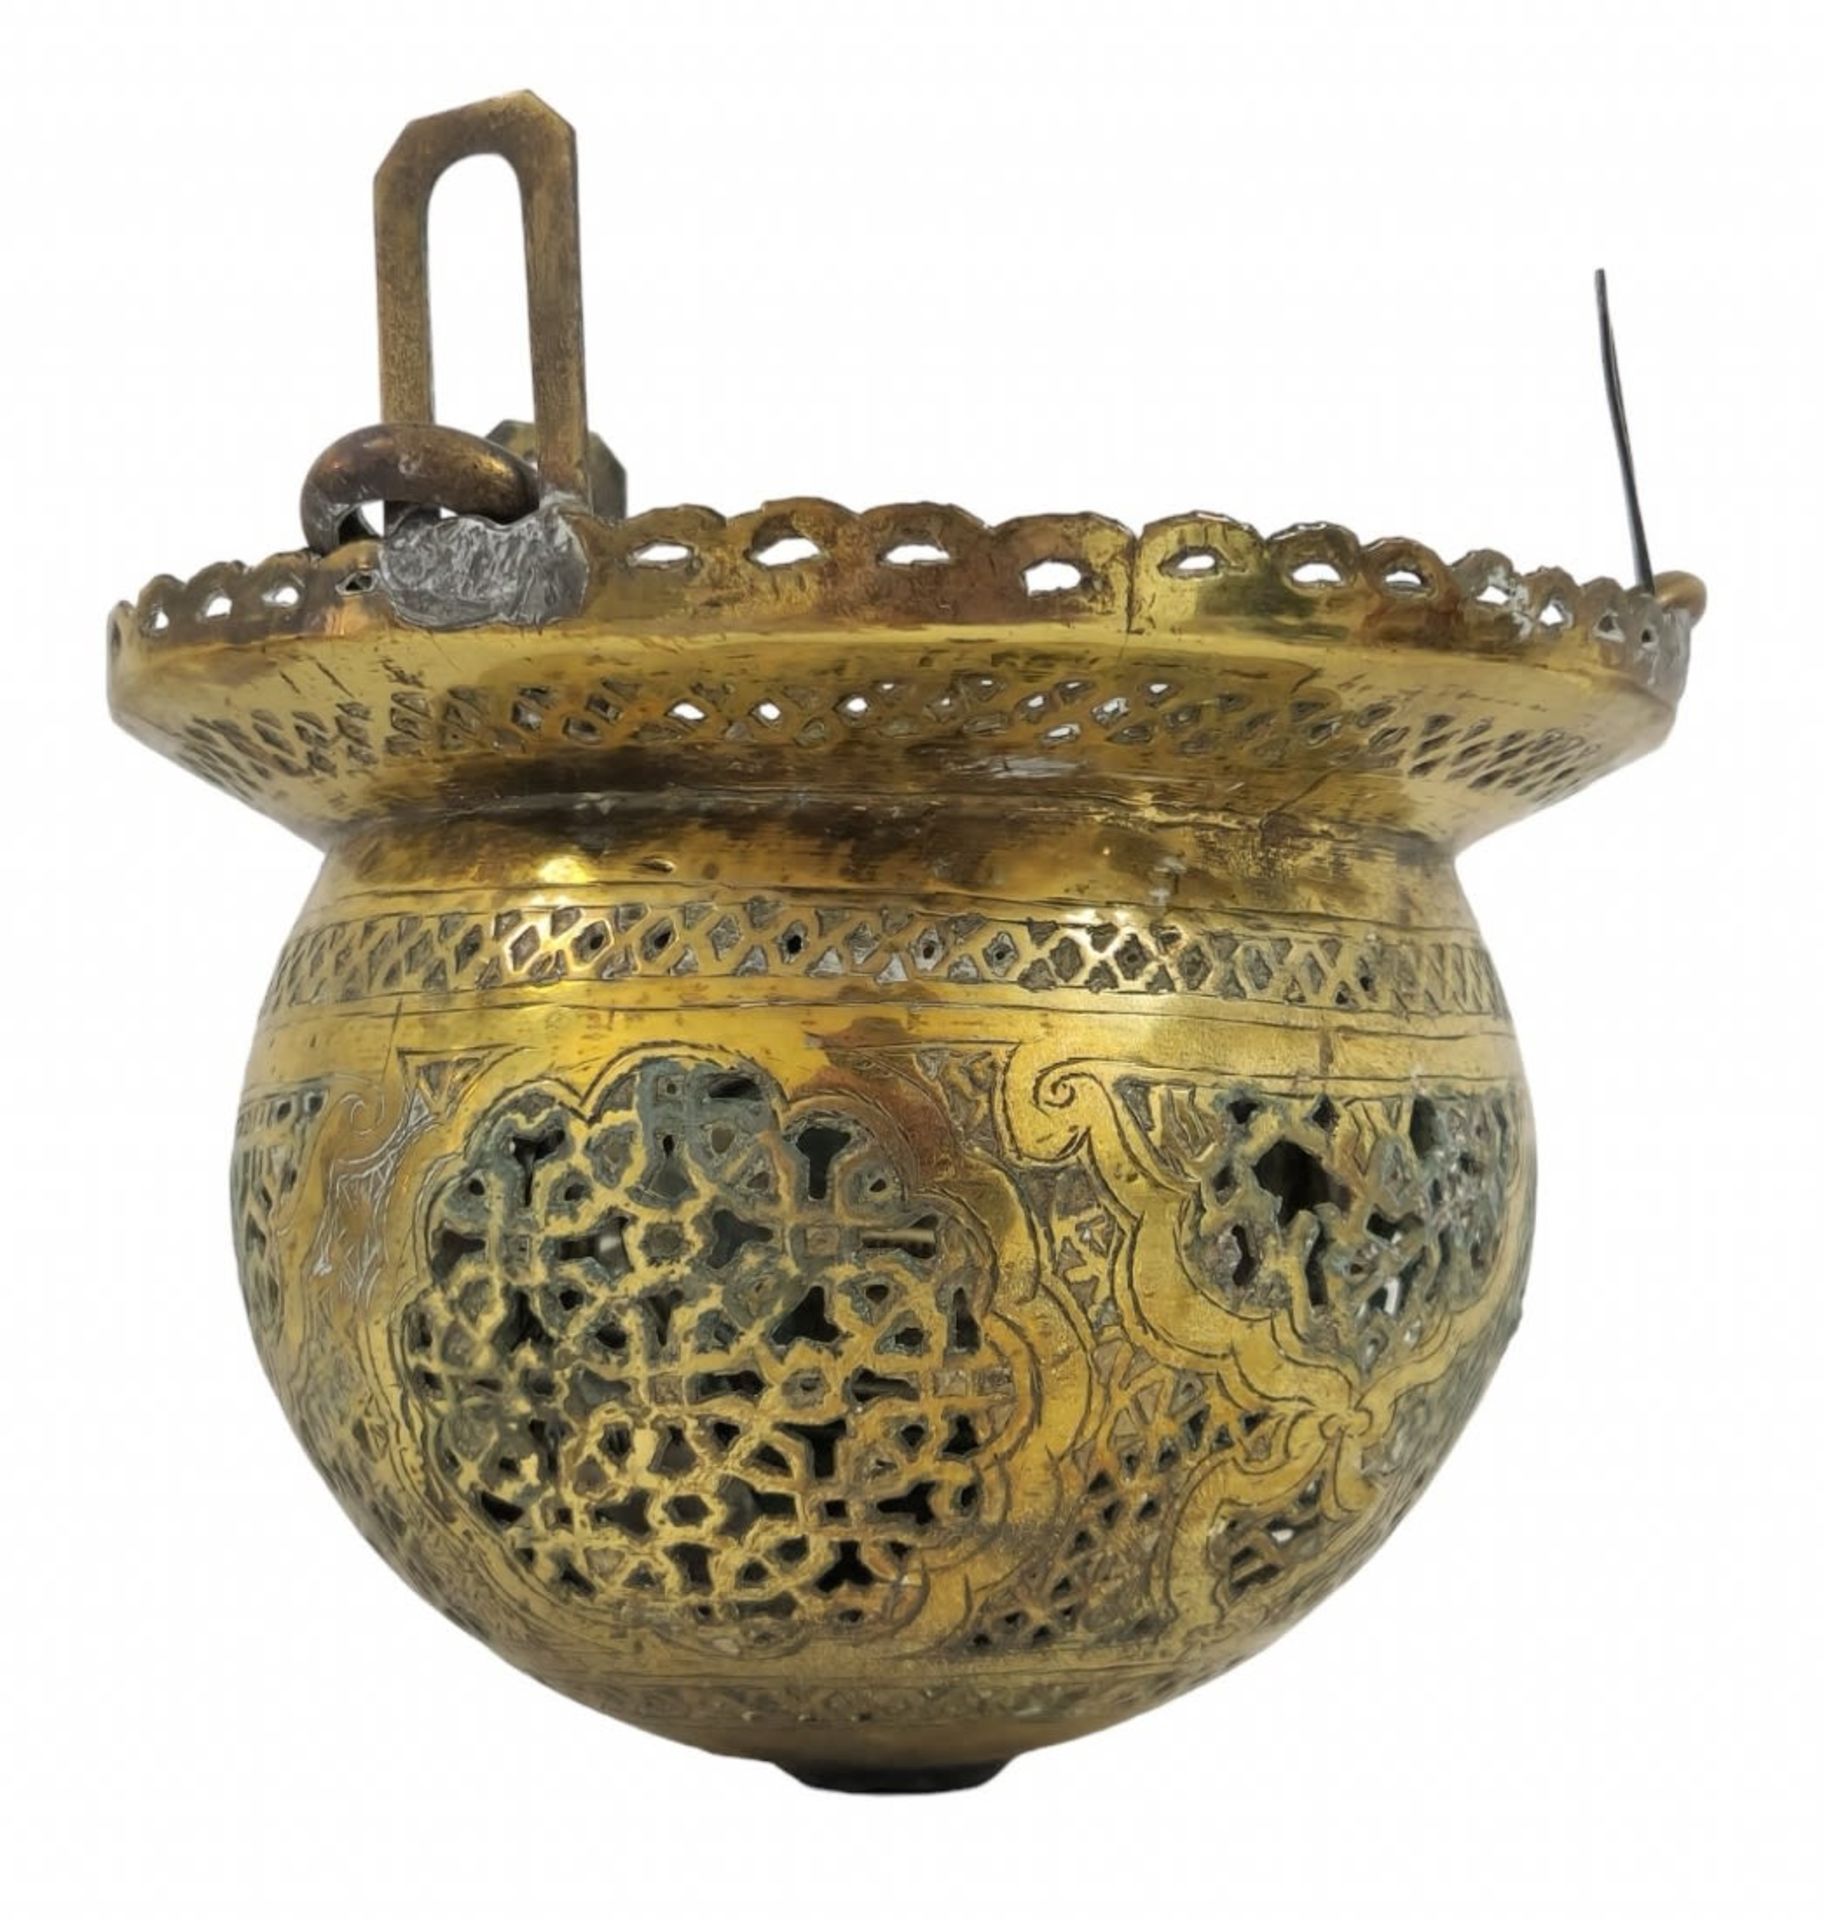 A pair of antique Islamic ceiling lamps, end of the 19th century, made of brass, decorated by hand - Image 3 of 5